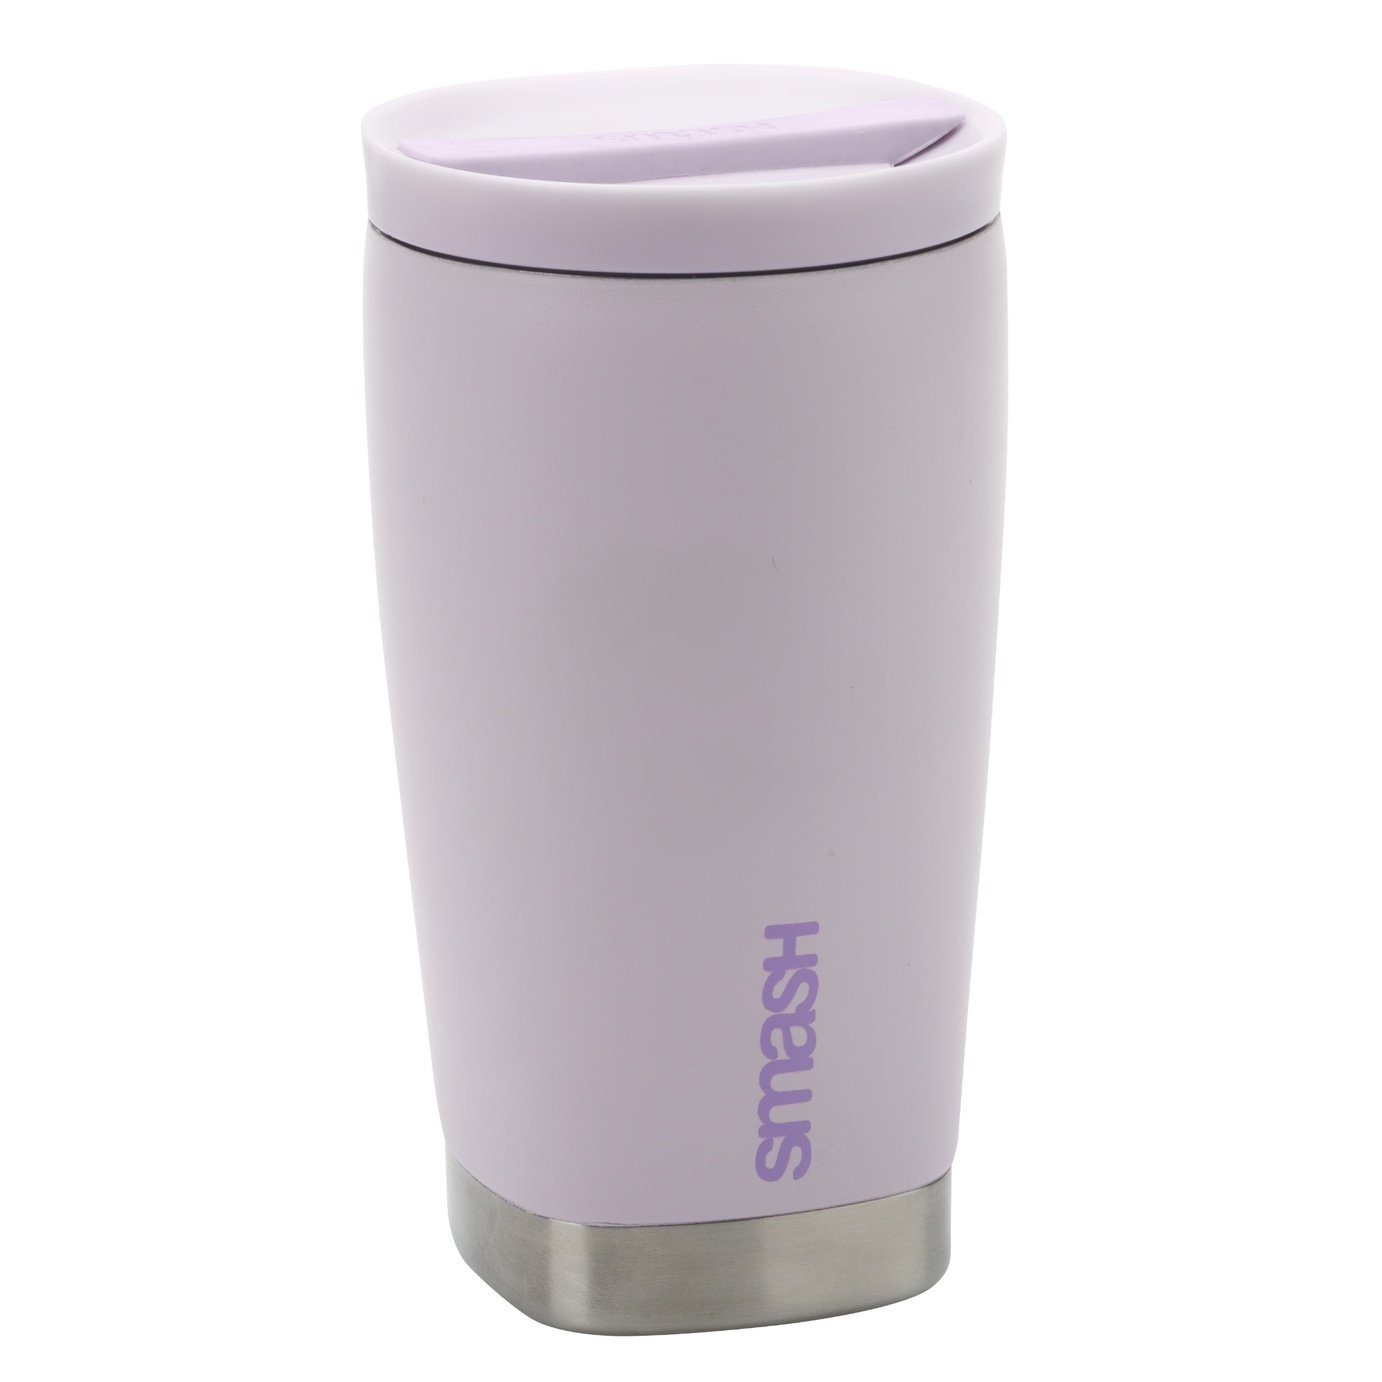 Smash Soft Touch Lilac Coffee Flask - 350ml